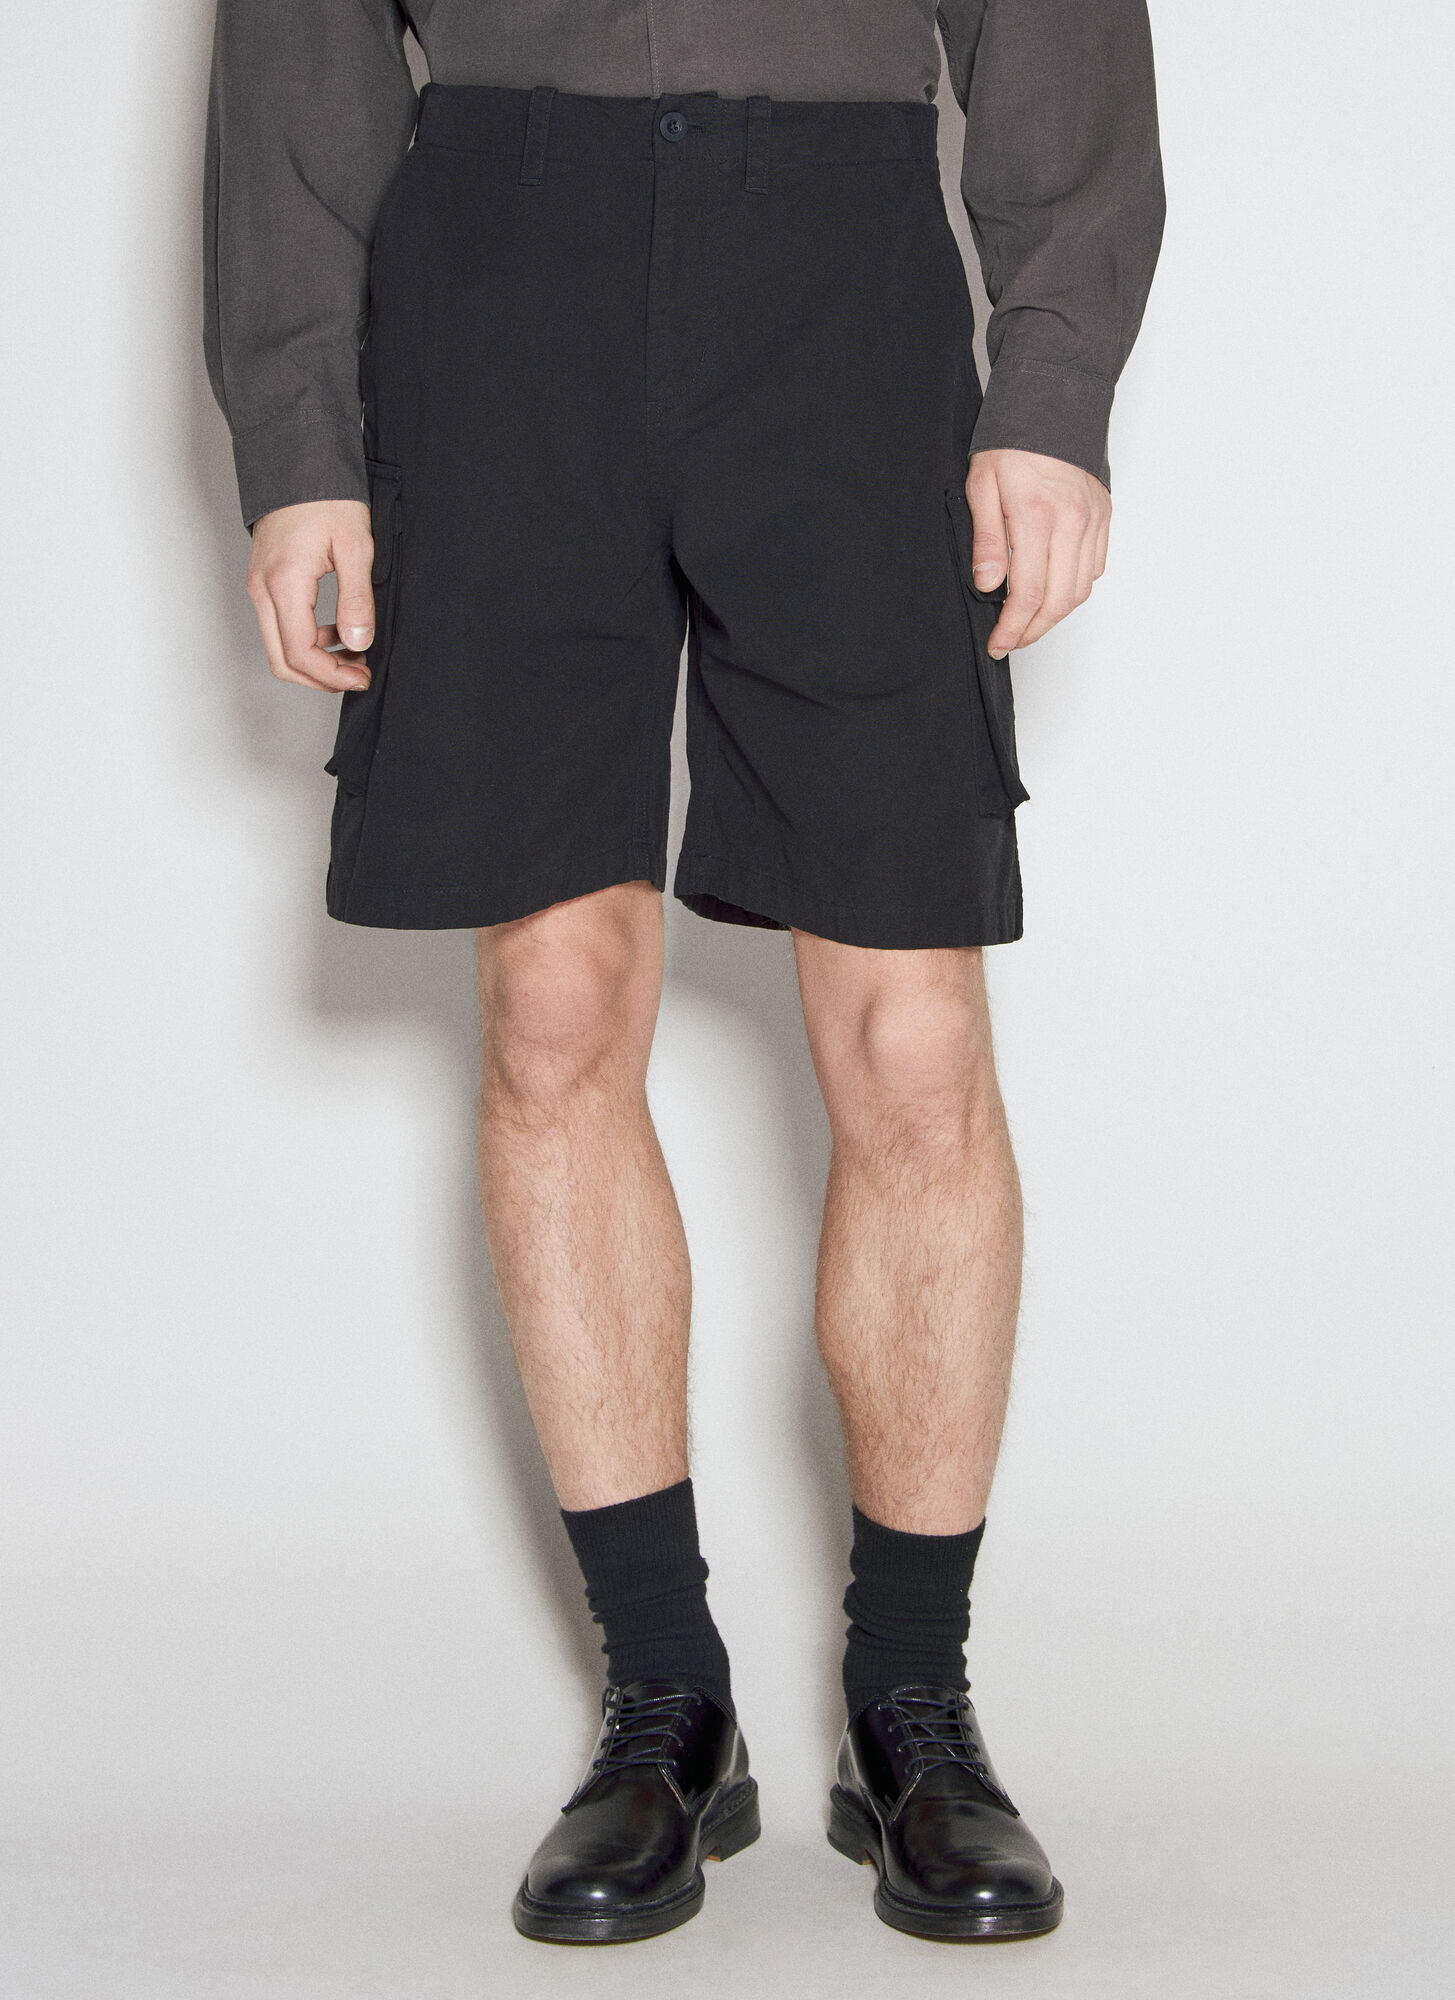 Shop Our Legacy Mount Shorts In Black